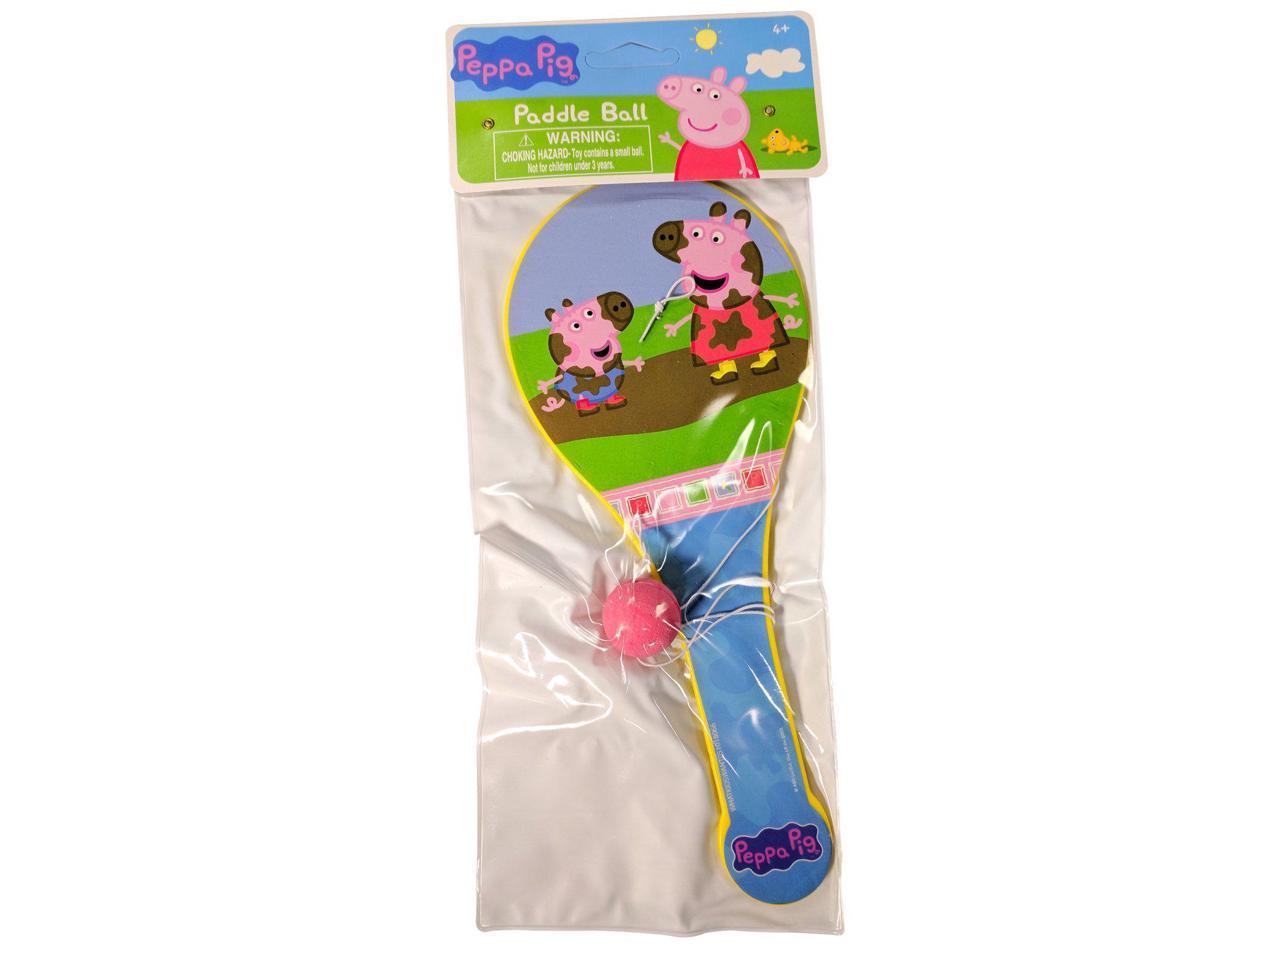 Peppa Pig Paddle Ball Indoor Outdoor Family Travel Toy Game 